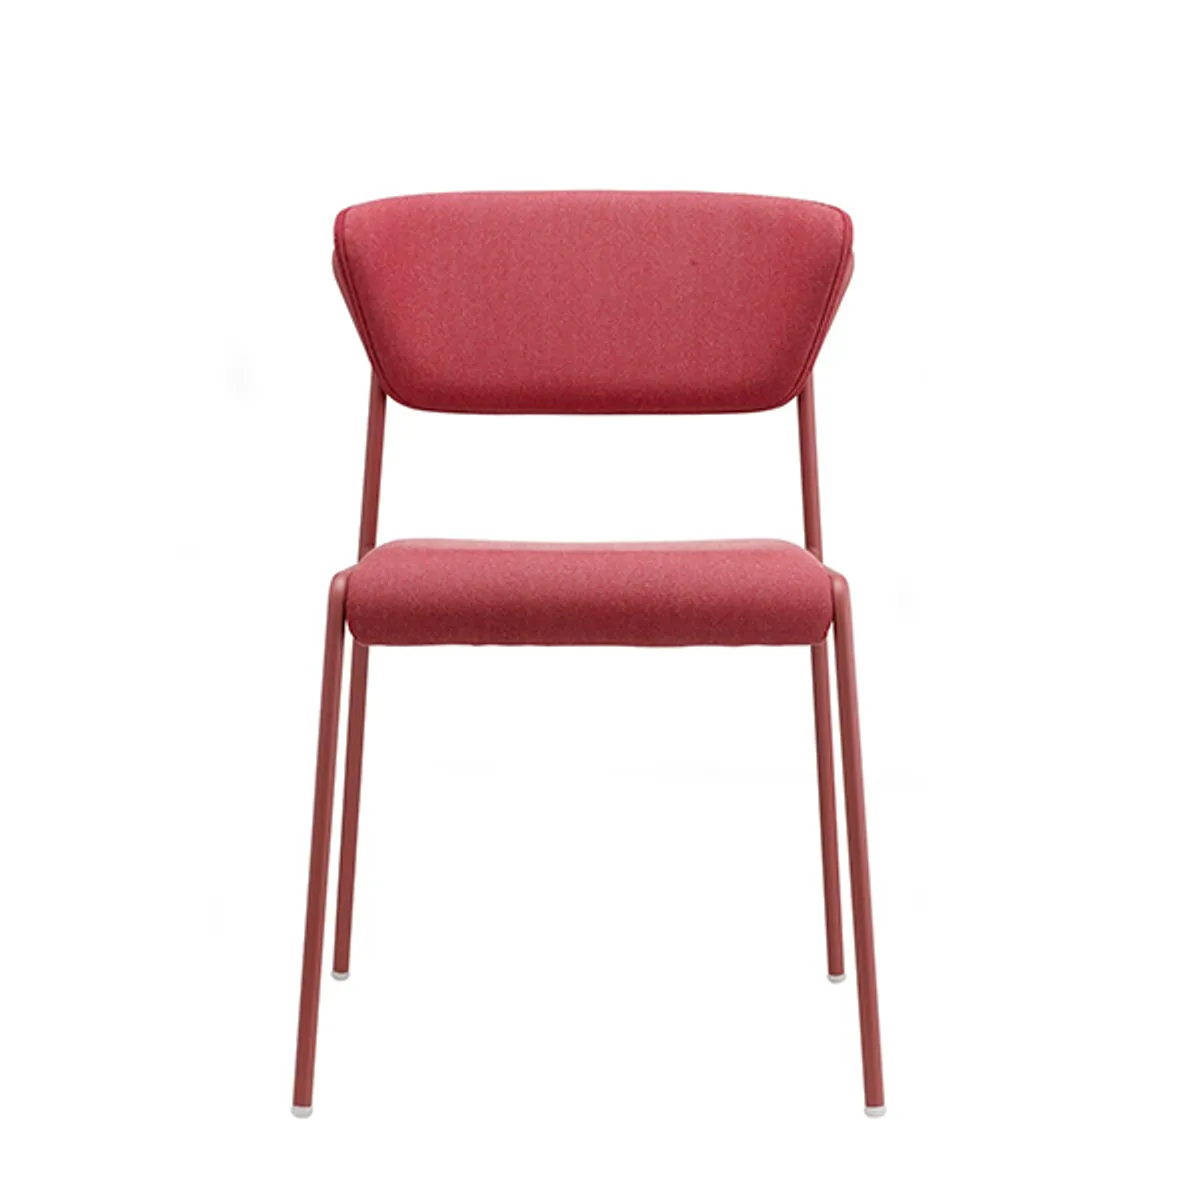 Robyn Soft Outdoor Chair Red 07